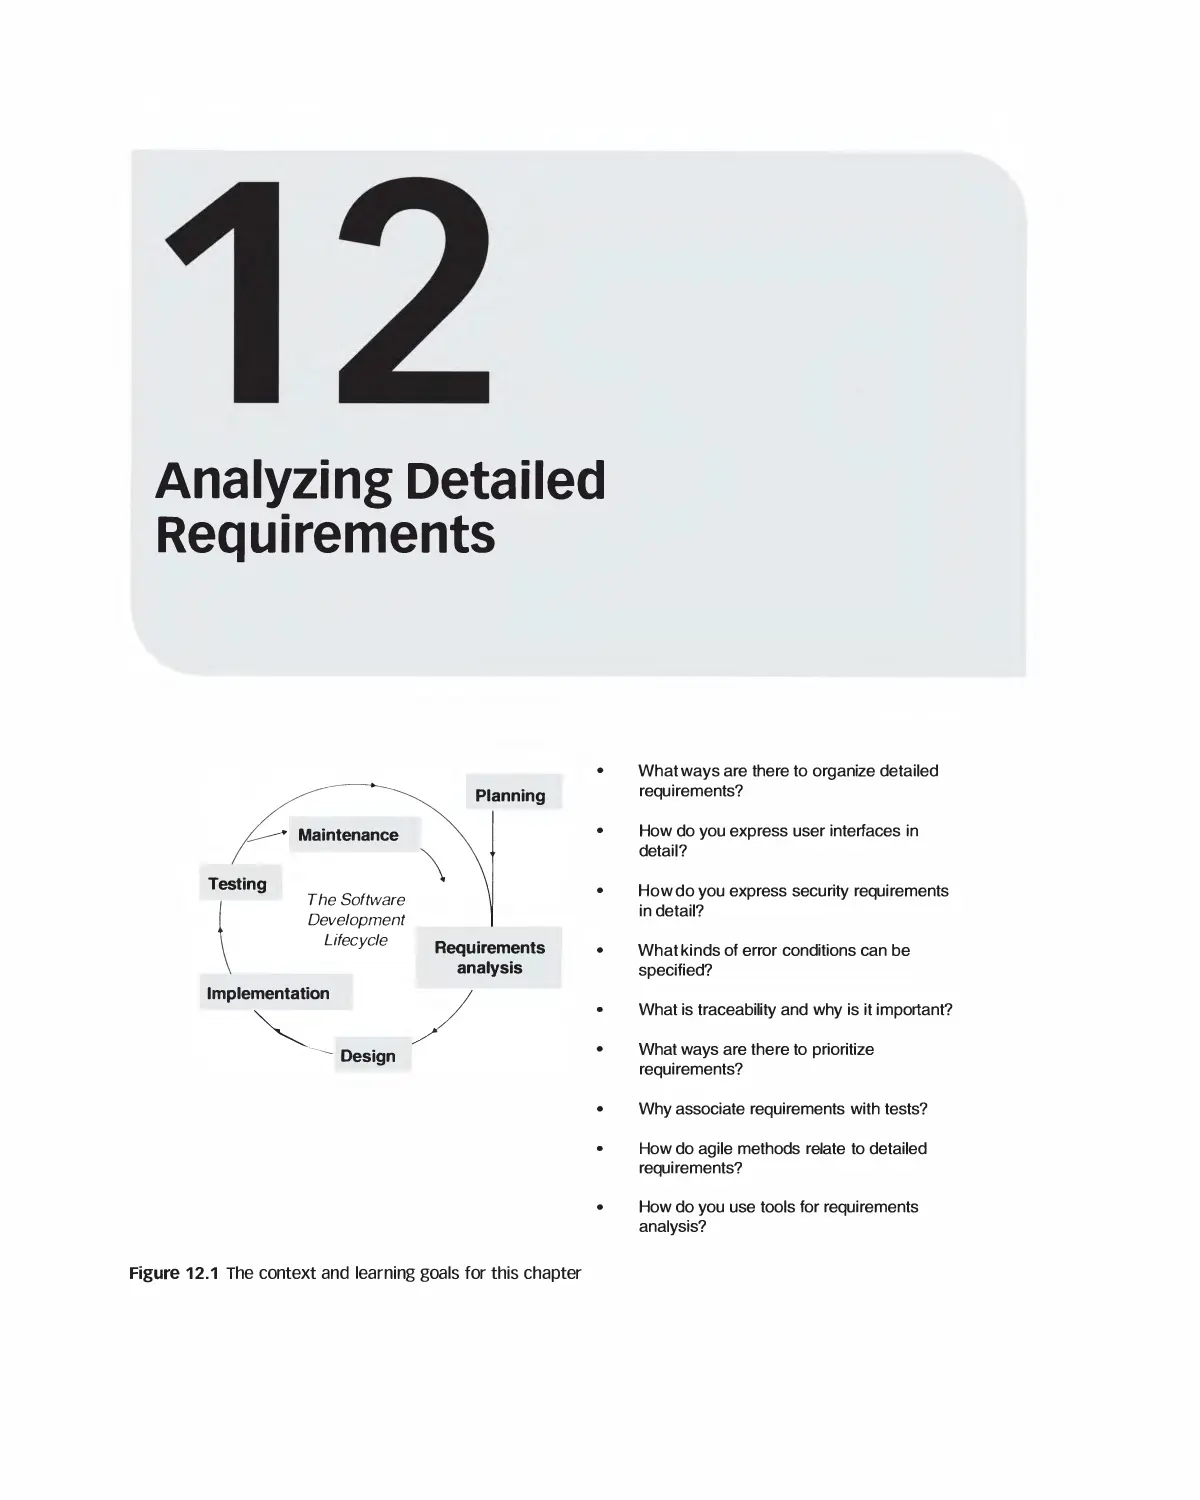 Chapter 12: Analyzing Detailed Requirements